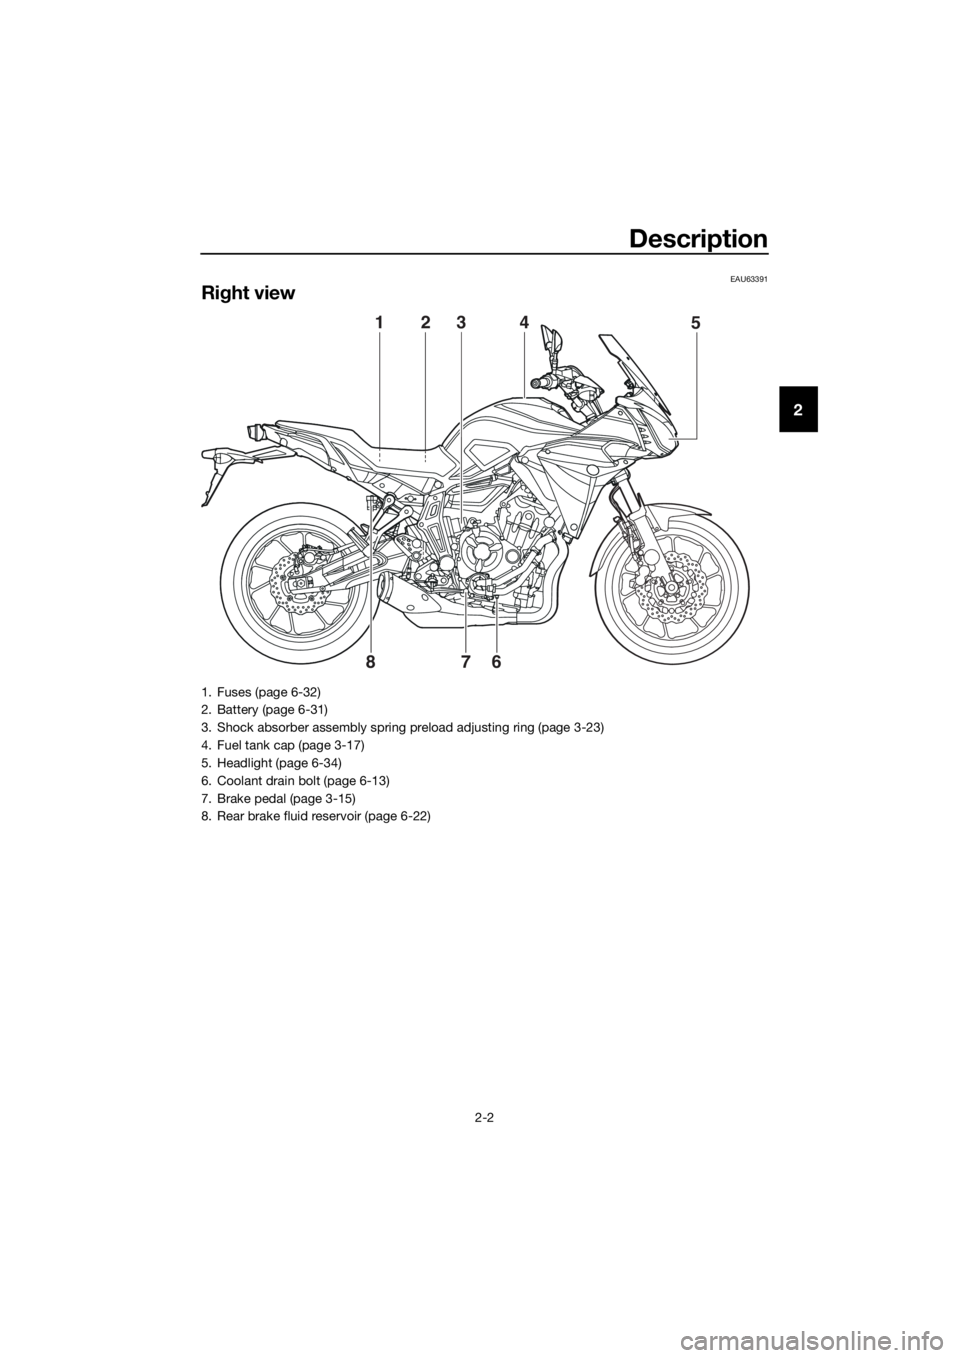 YAMAHA TRACER 700 2017  Owners Manual Description
2-2
2
EAU63391
Right view
215
6
7 8
34
1. Fuses (page 6-32)
2. Battery (page 6-31)
3. Shock absorber assembly spring preload adjusting ring (page 3-23)
4. Fuel tank cap (page 3-17)
5. Head